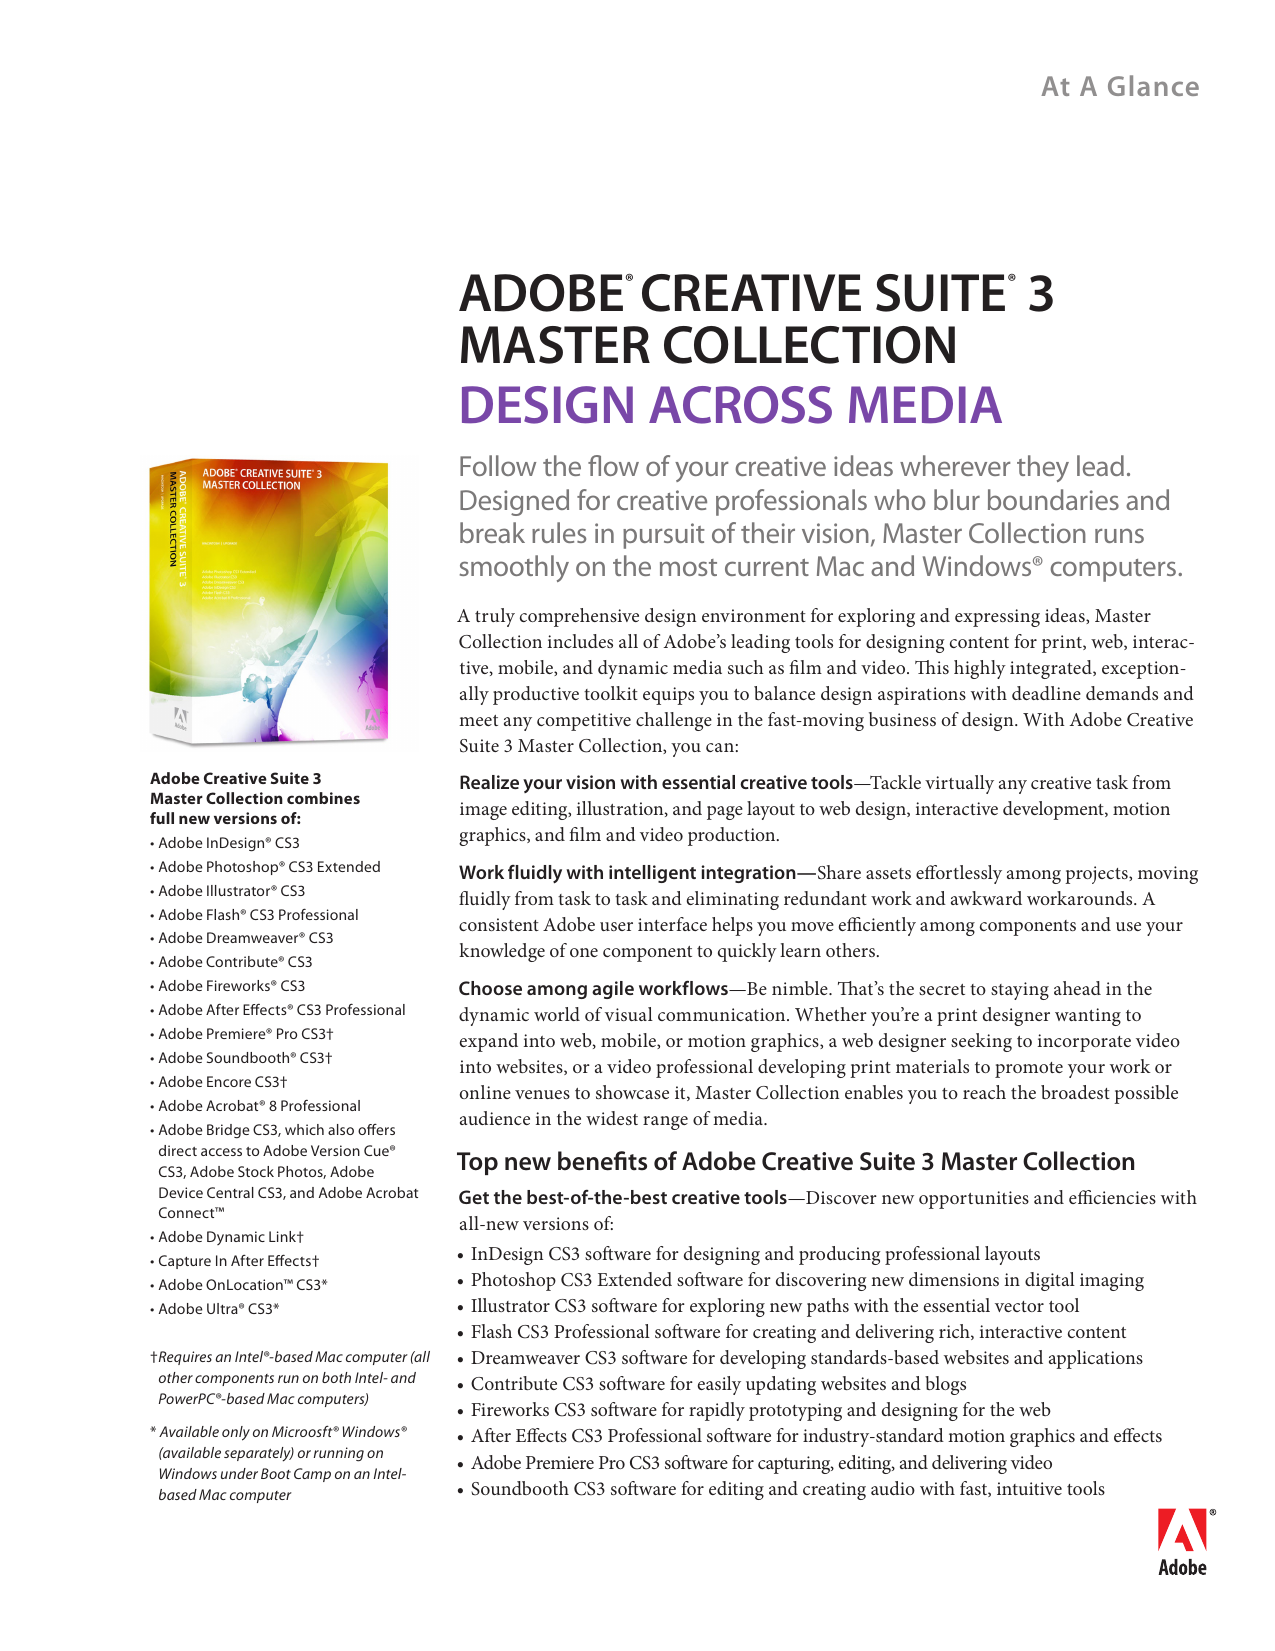 will adobe creative suite 3 for pc run on a mac